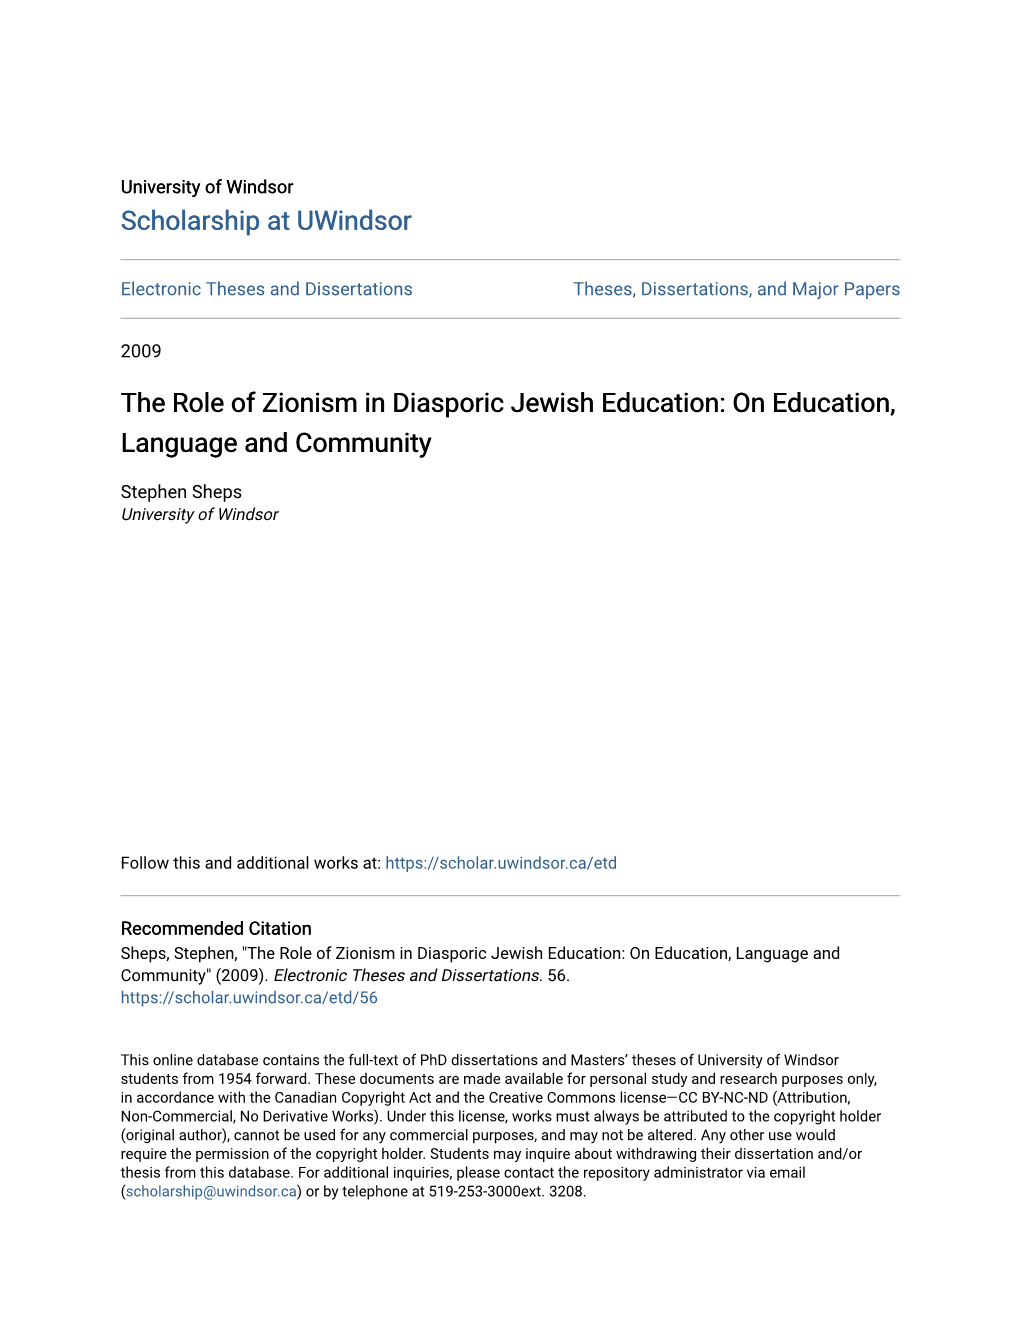 The Role of Zionism in Diasporic Jewish Education: on Education, Language and Community